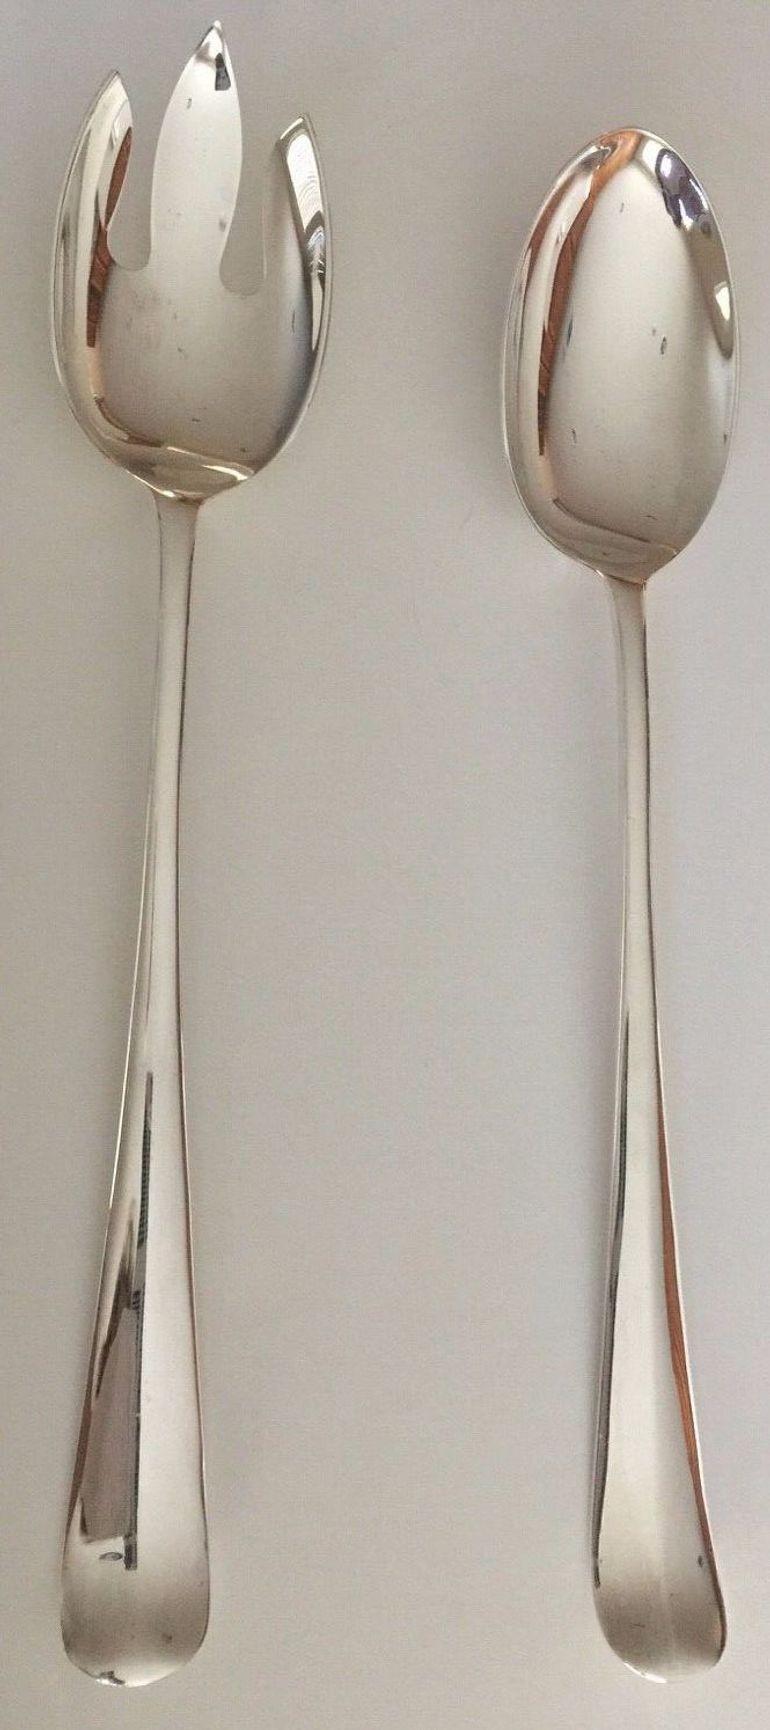 1950s Two Pieces Salad Serving Set Silver Plate Hallmark England 4915.
SG Hall Mark England Large Silver Plate Serving Spoon and Fork Set.
England Hallmark SG A-1 Silver Plate Serving Fork and Spoon in Original Bags and Box.
Mid 20th Century large